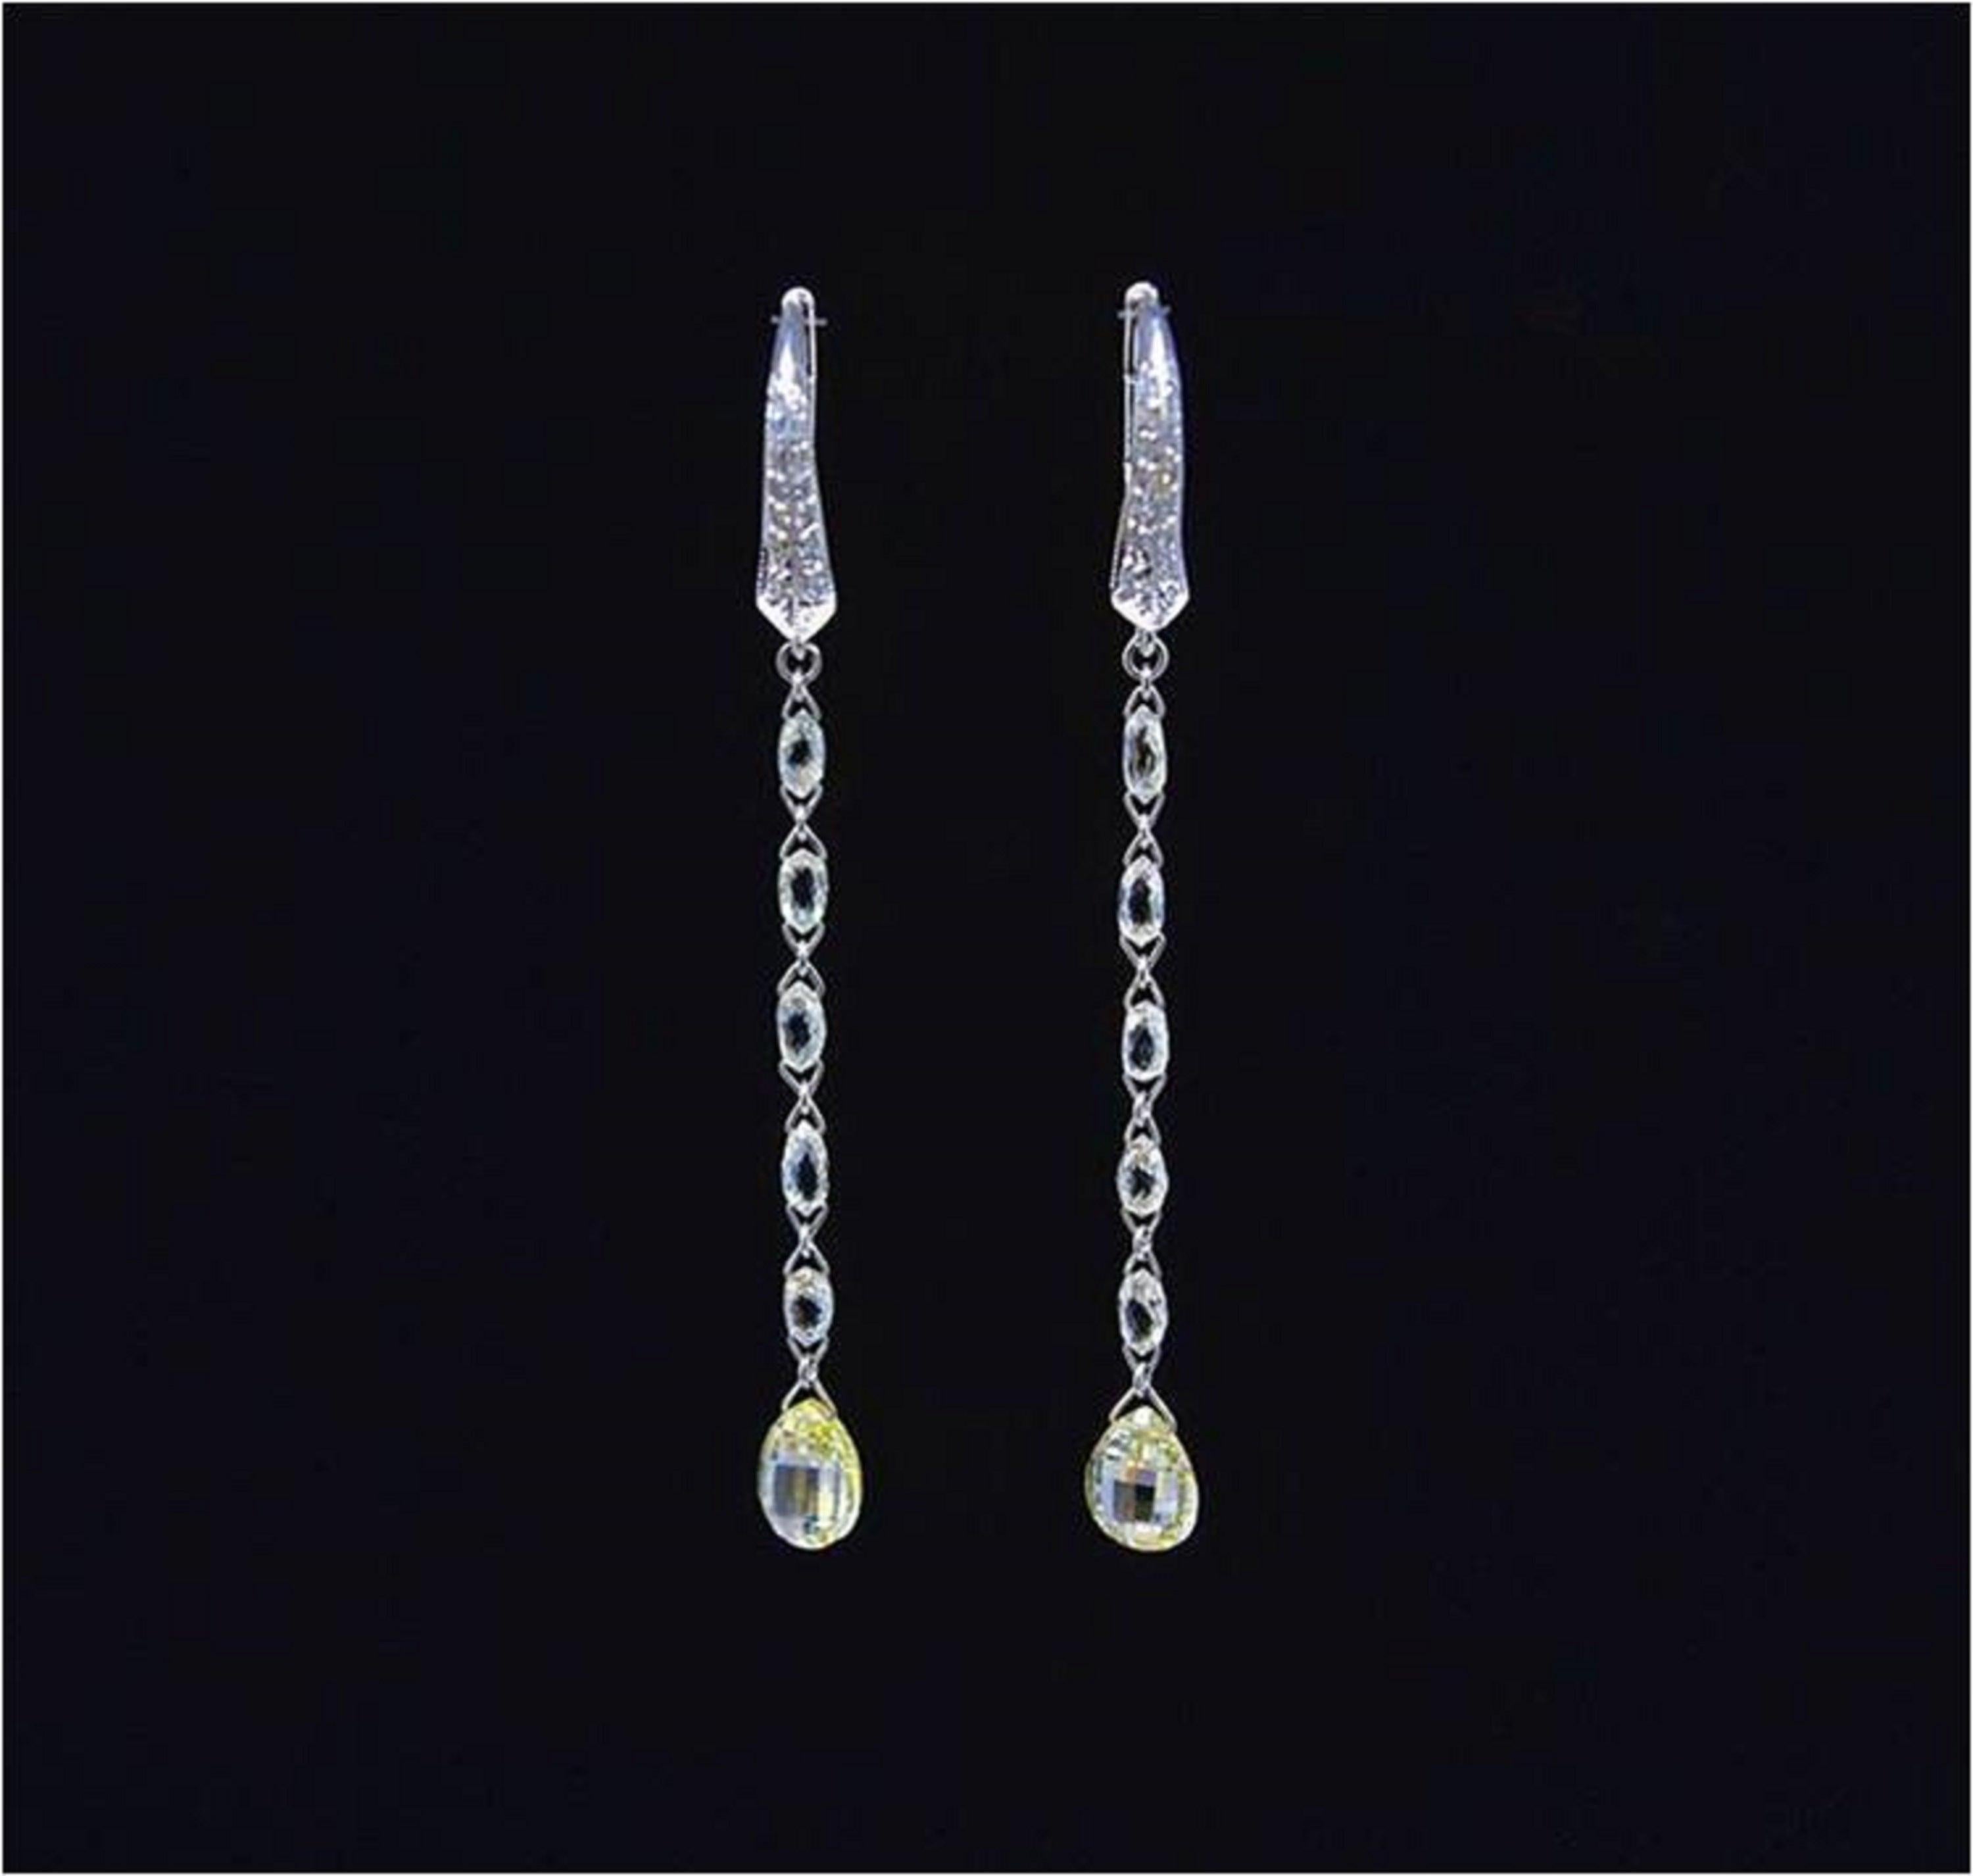 PANIM Diamond Briolette 18K White Gold Mono Drop Earrings

A unique day to day wear stunning dangling earrings. Each earrings contain drop shaped diamond briolettes with Natural Fancy Color Briolettes at the bottom in 18K White Gold.

Total Diamond